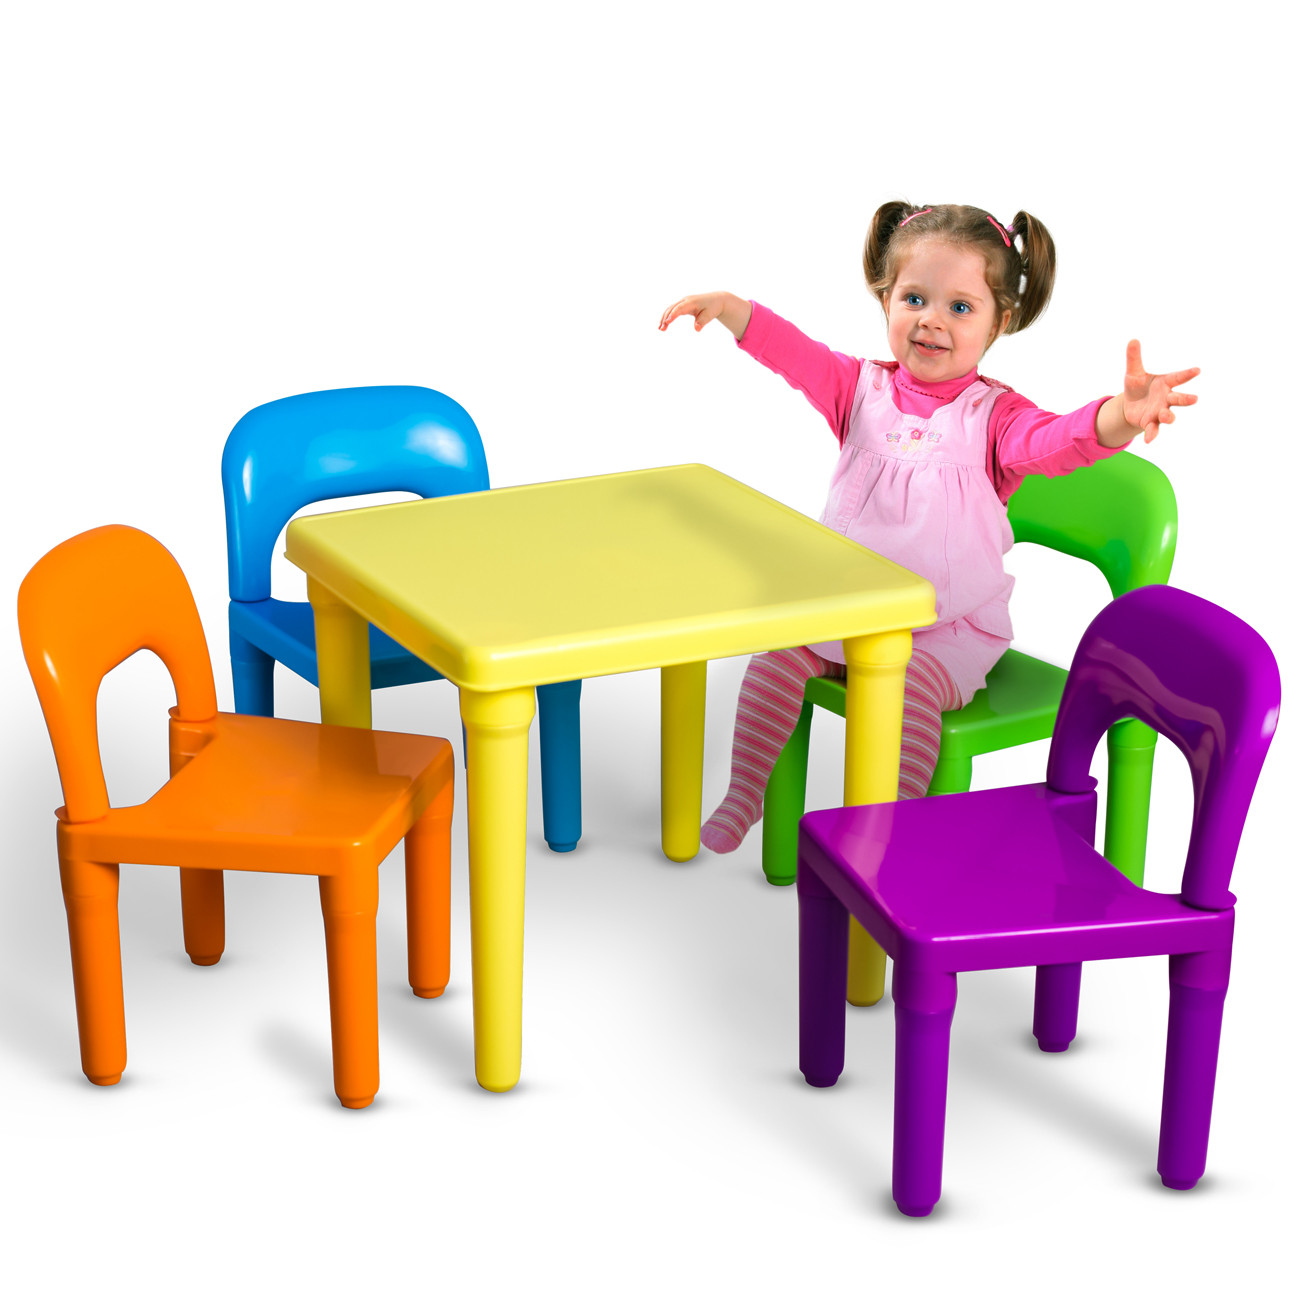 Kids Outdoor Table And Chair
 Kids Table and Chairs Play Set Toddler Child Toy Activity